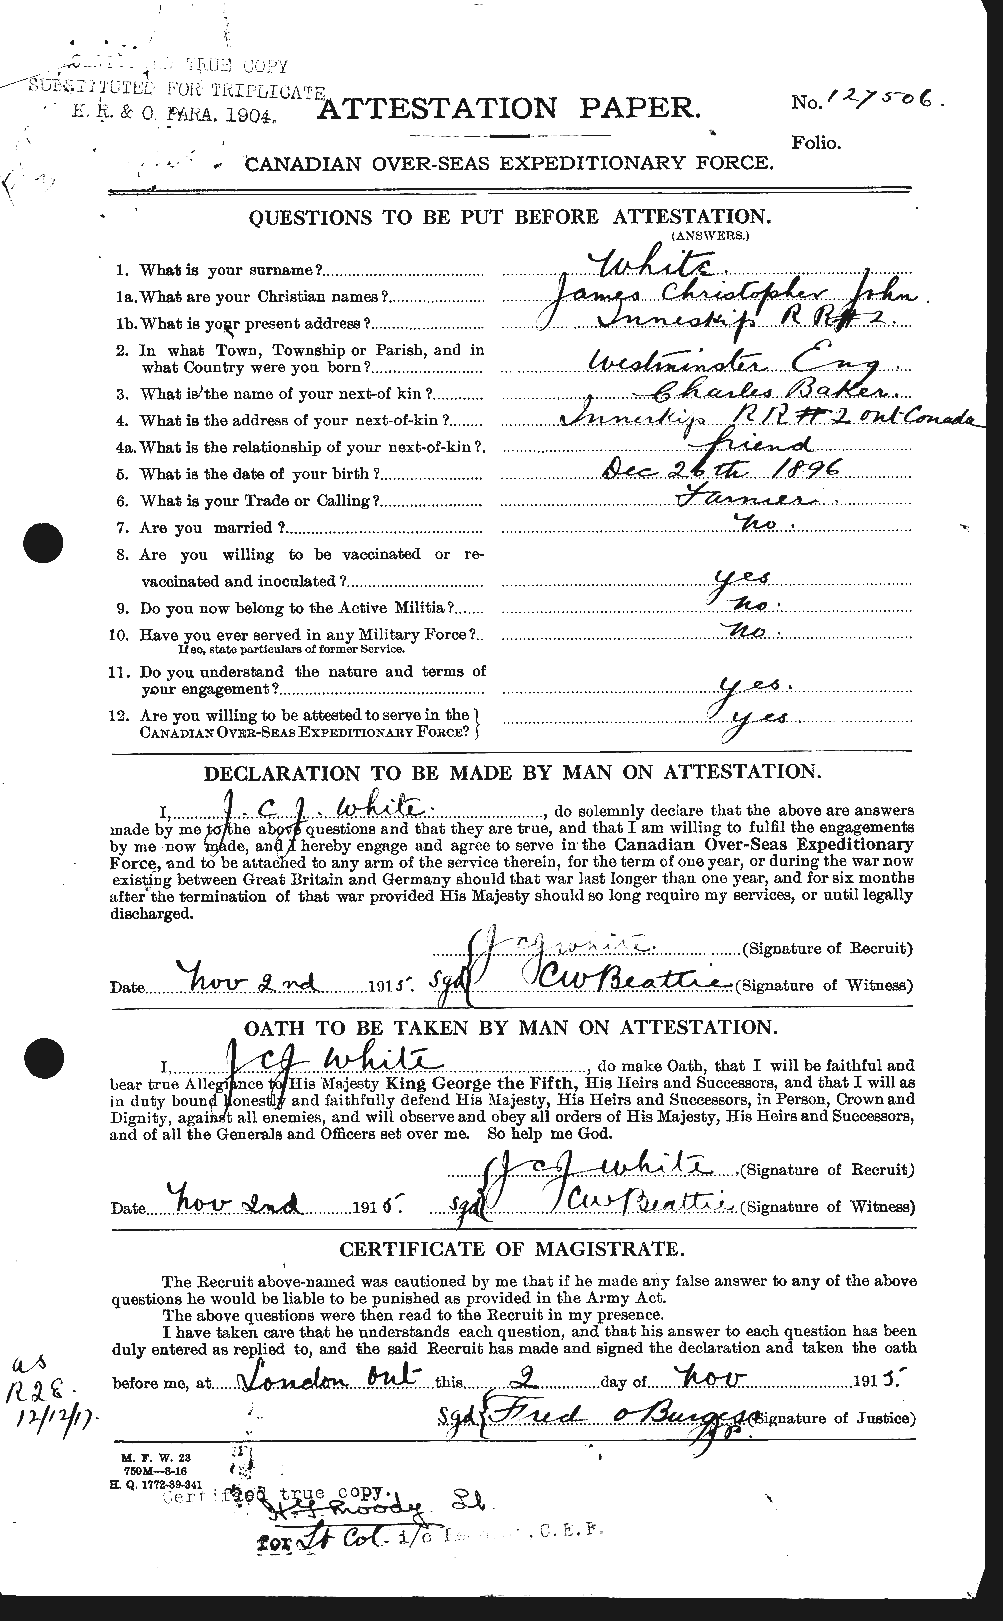 Personnel Records of the First World War - CEF 671435a